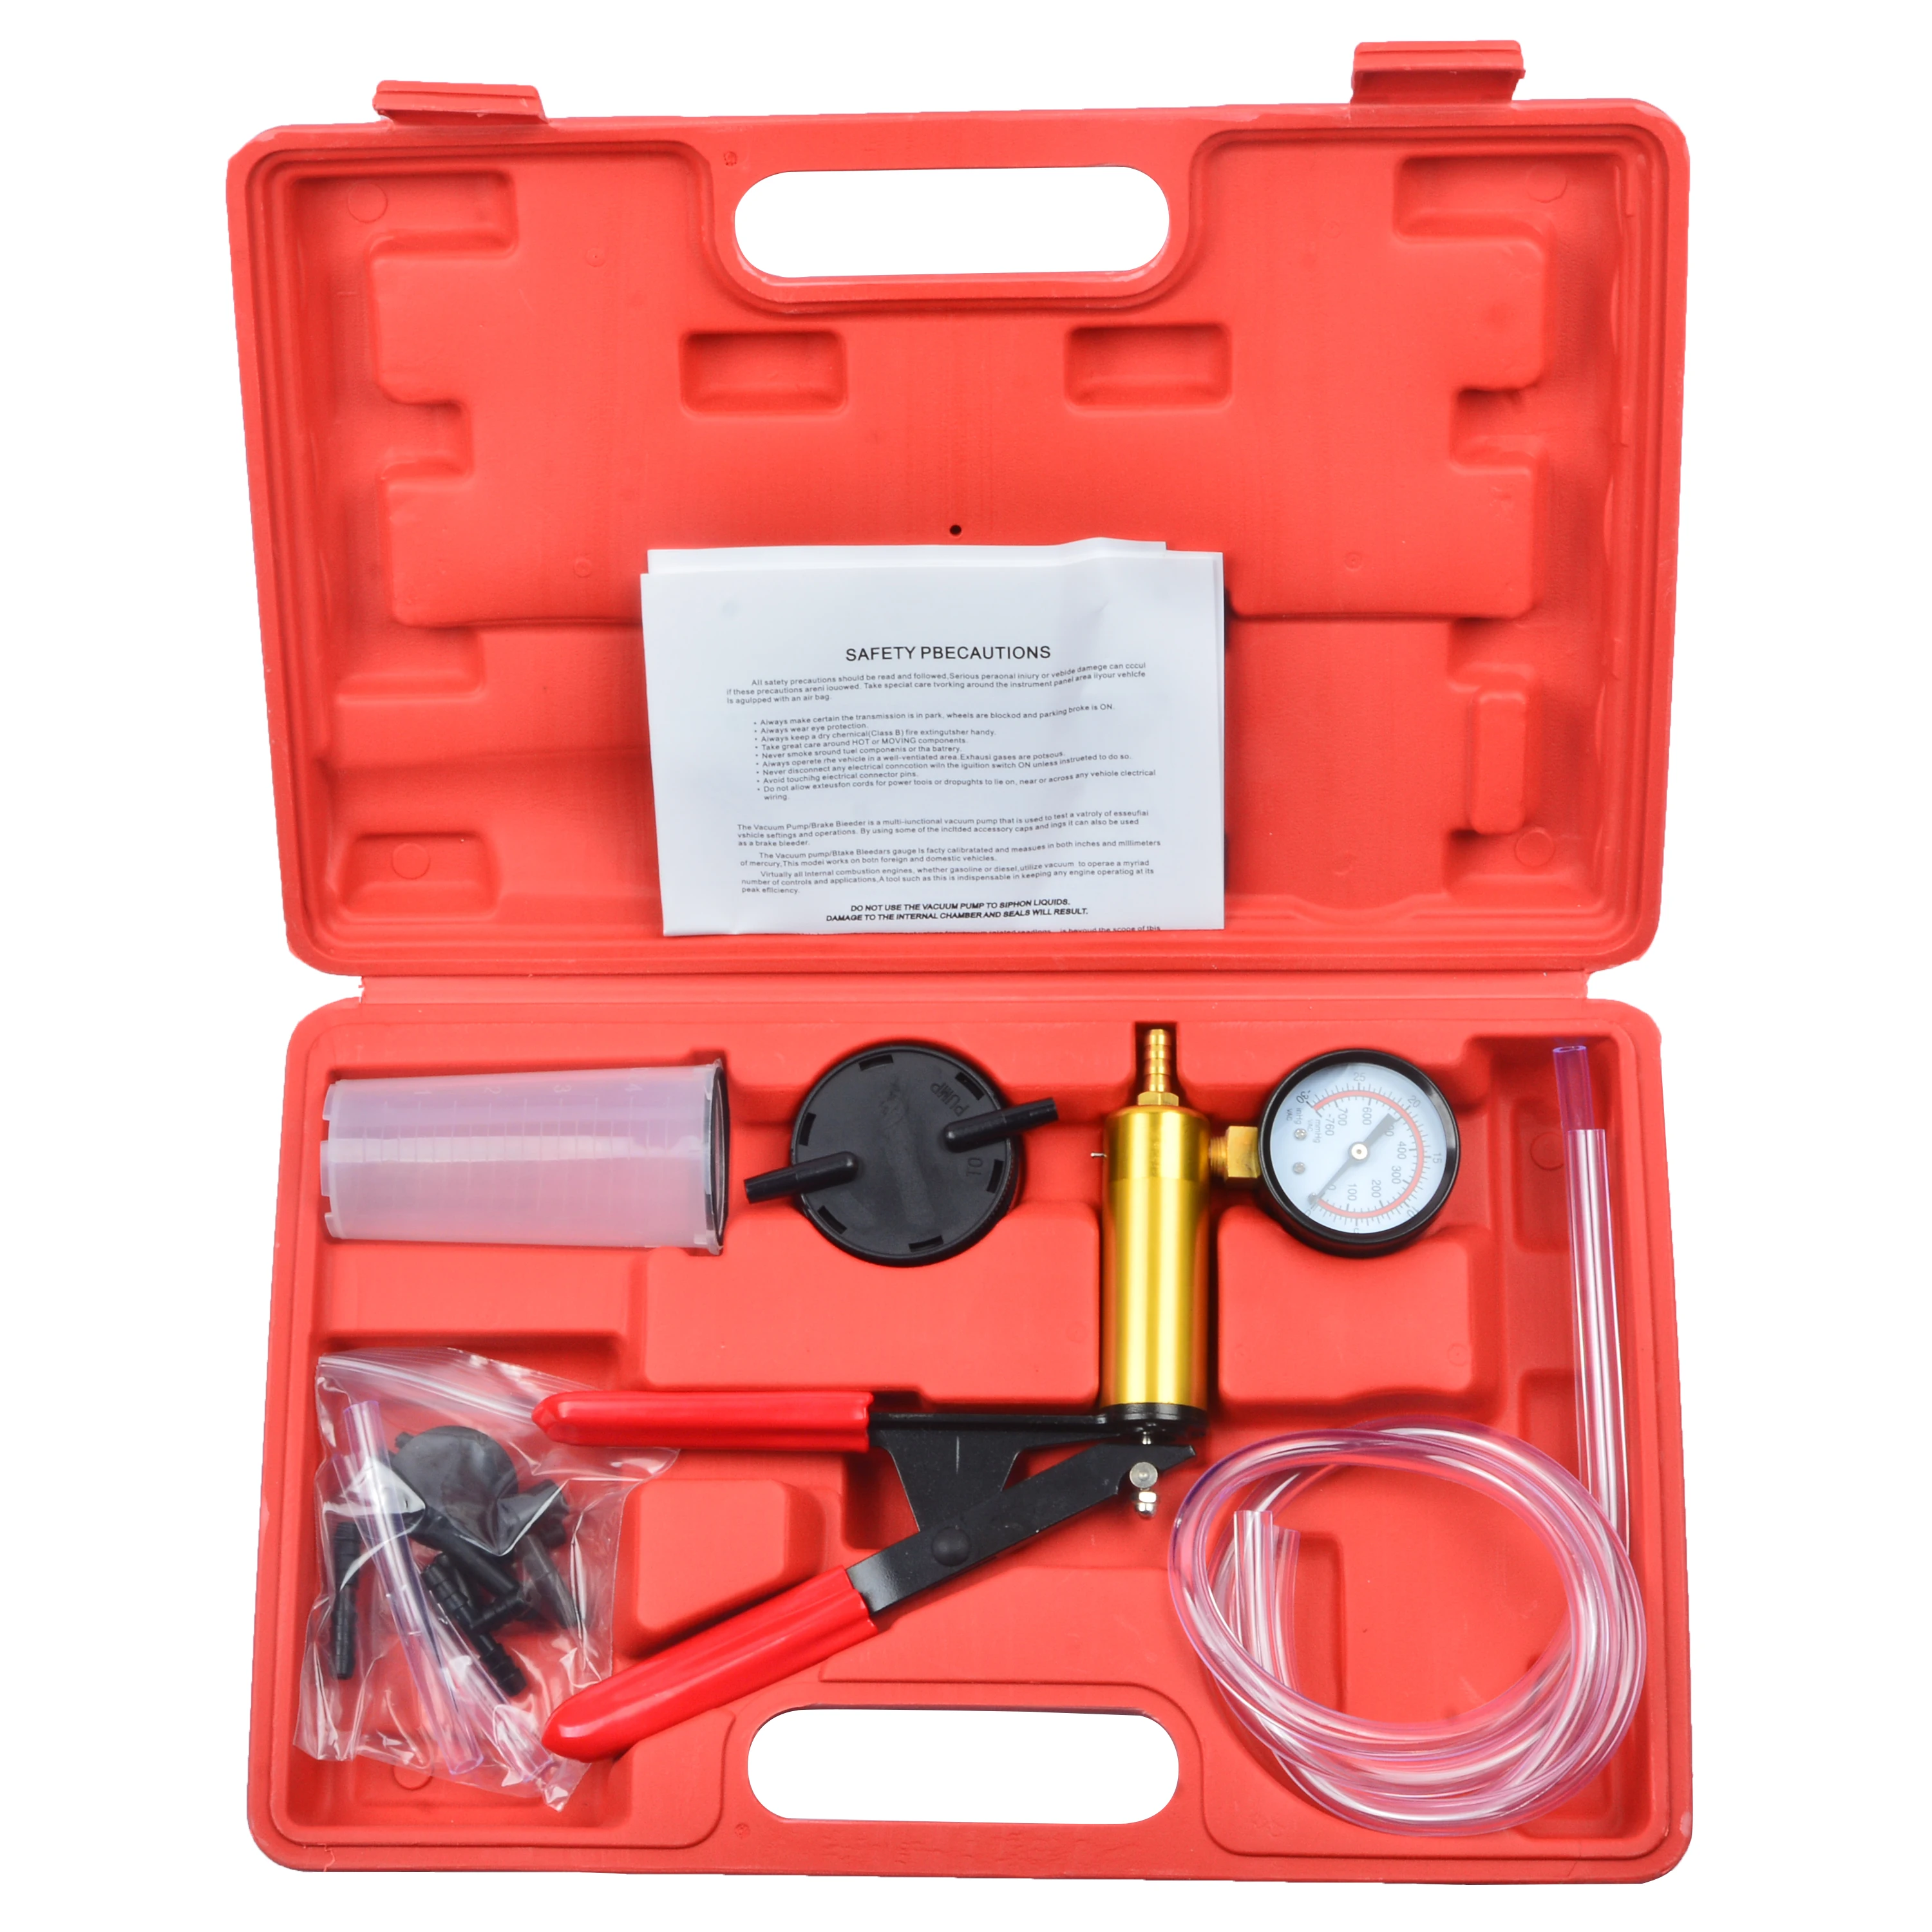 Swess Vacuum Pump and Brake Bleeder Kit-2 in 1 Hand Held Vacuum Pump Test for Automotive Tuner Tools with Adapters and Case 